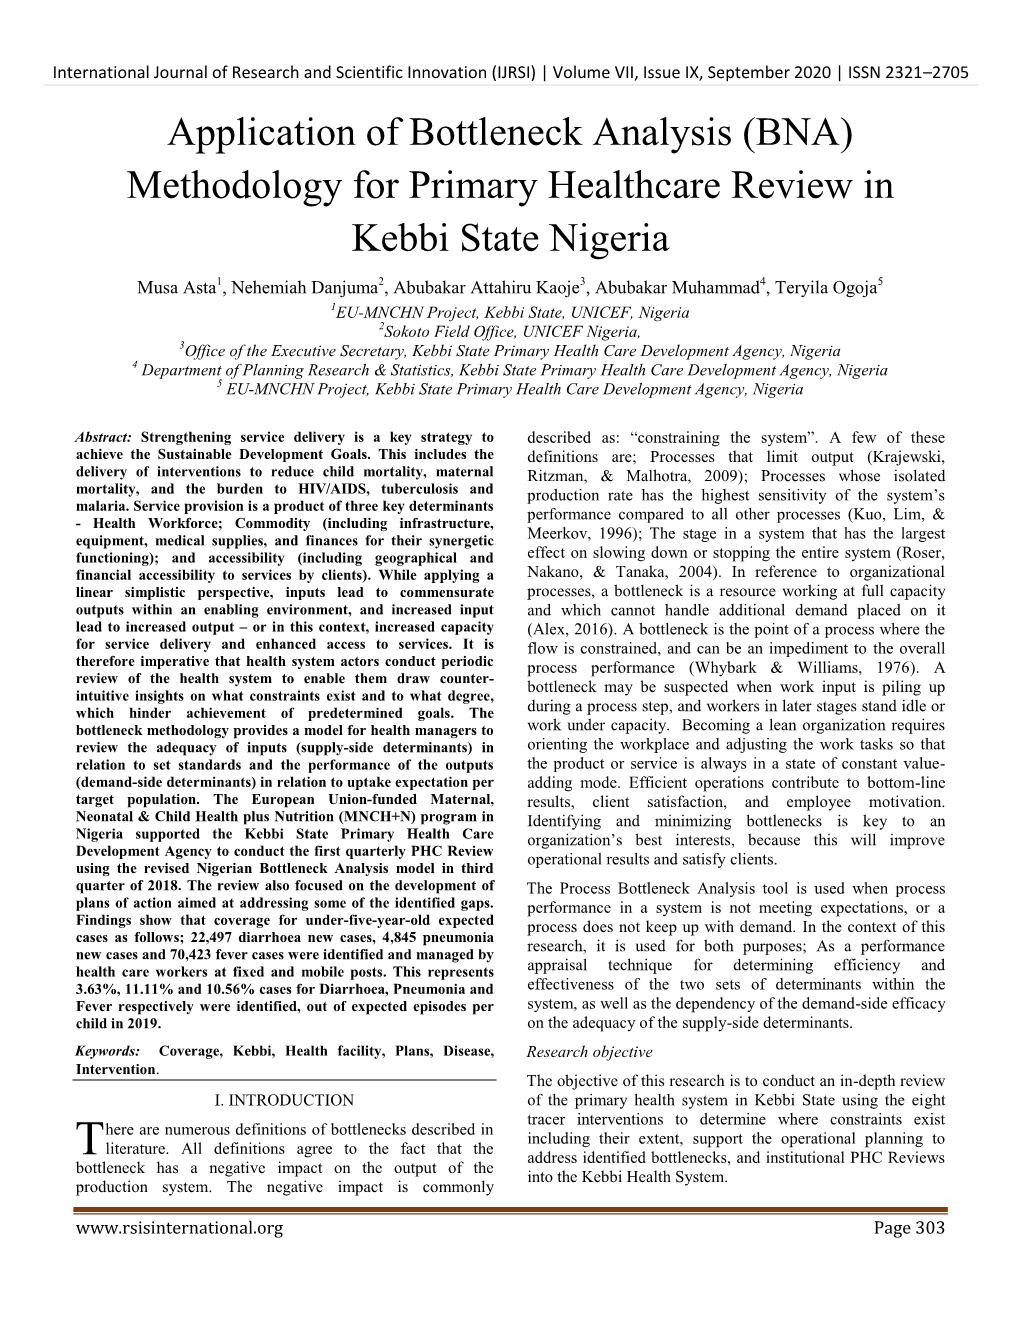 Methodology for Primary Healthcare Review in Kebbi State Nigeria